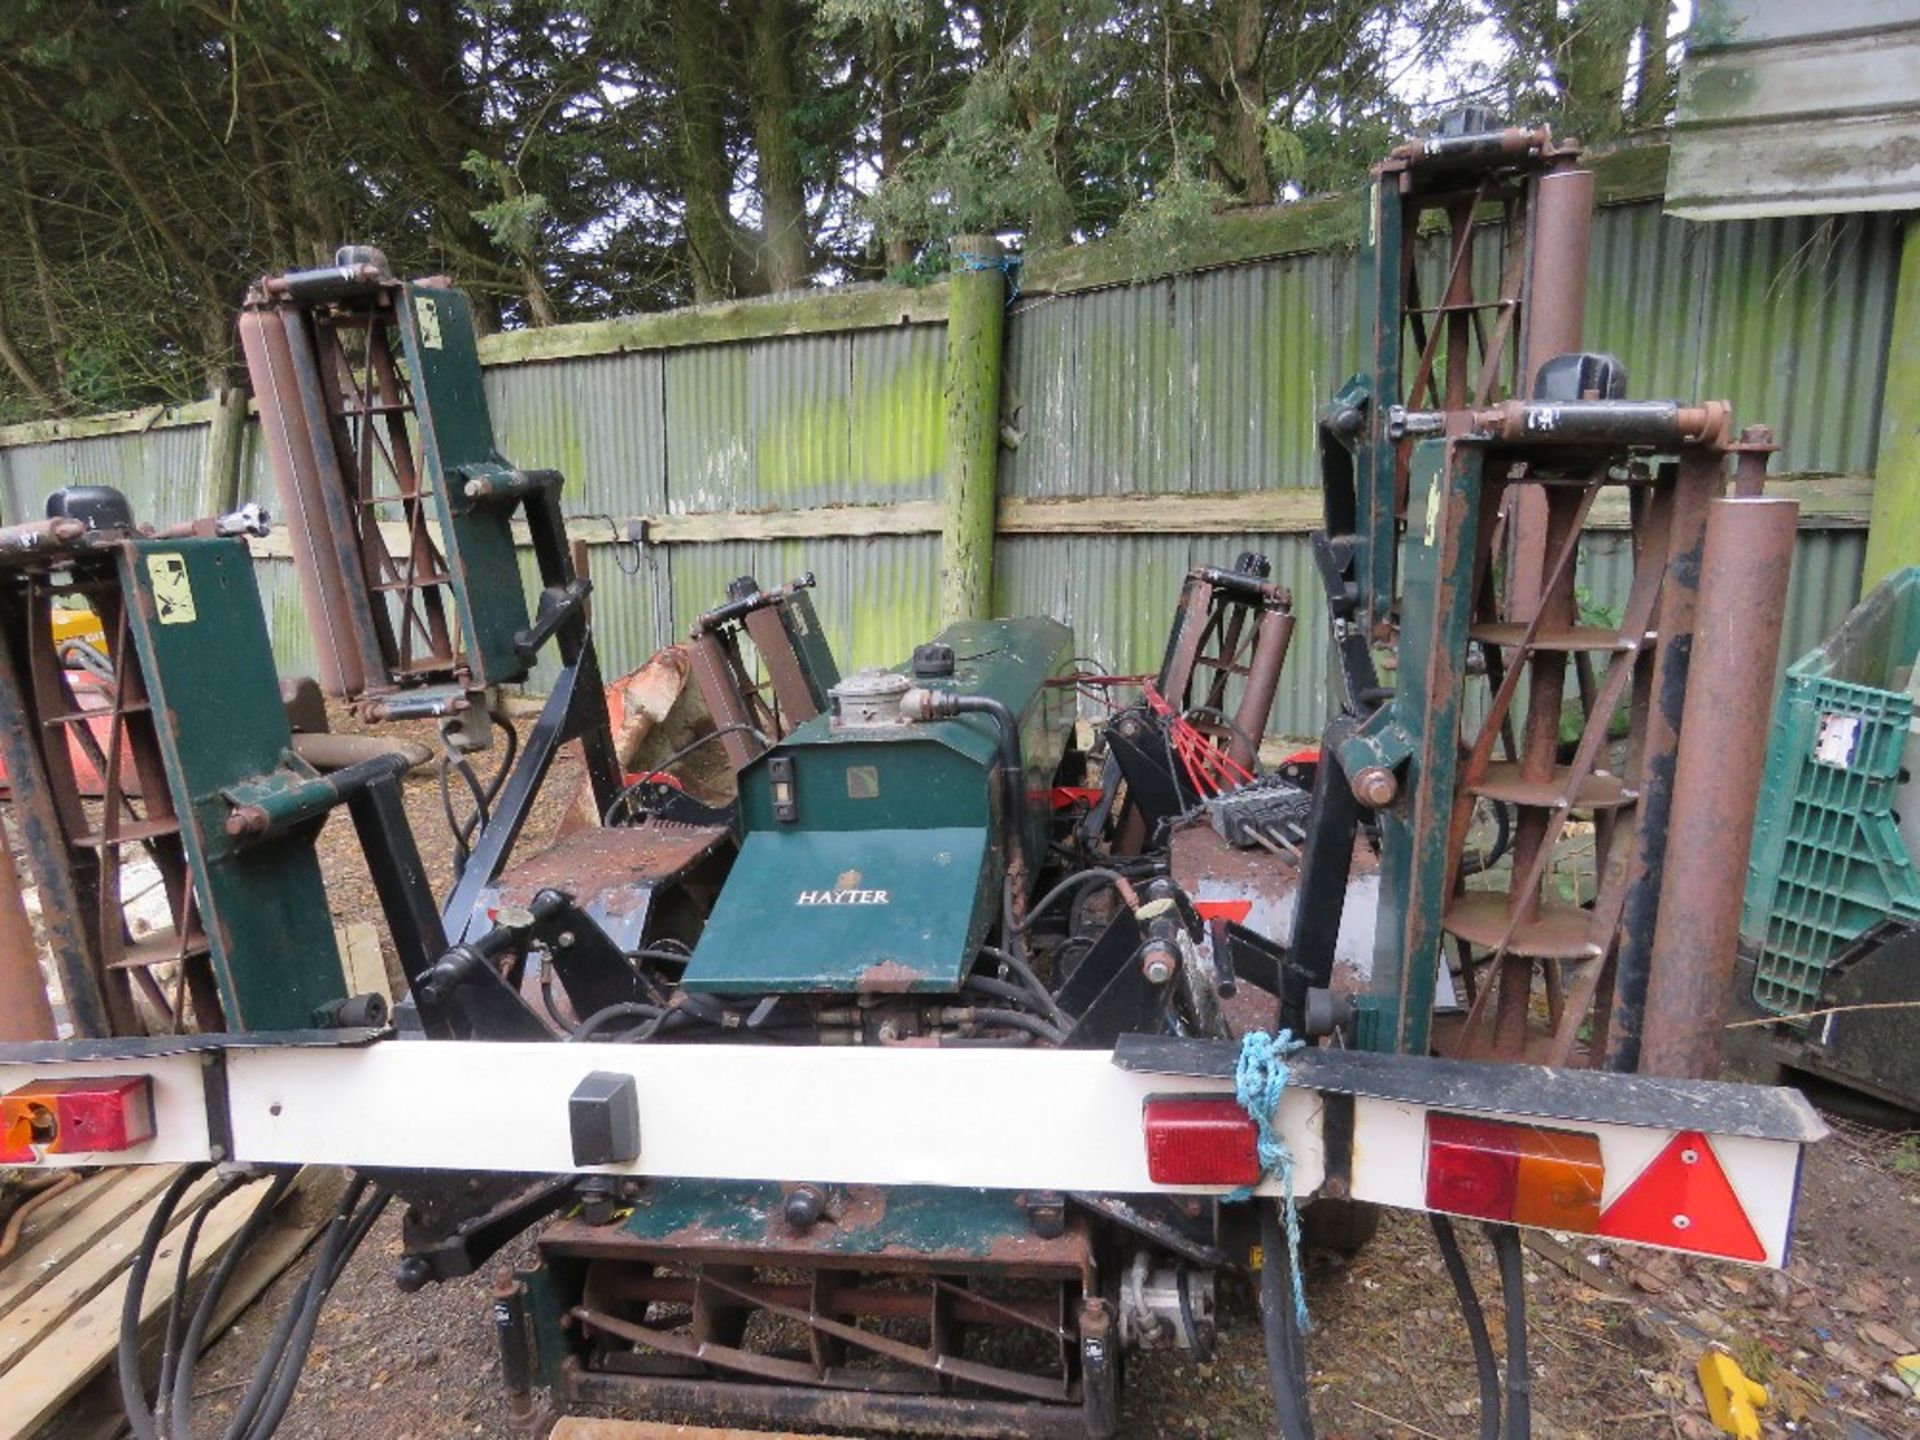 HAYTER TM729 TOWED GHAYTER TM729 TOWED G HAYTER TM729 TOWED GANG MOWER SET, PREVIOUS COUNCIL USEAGE. - Image 3 of 6